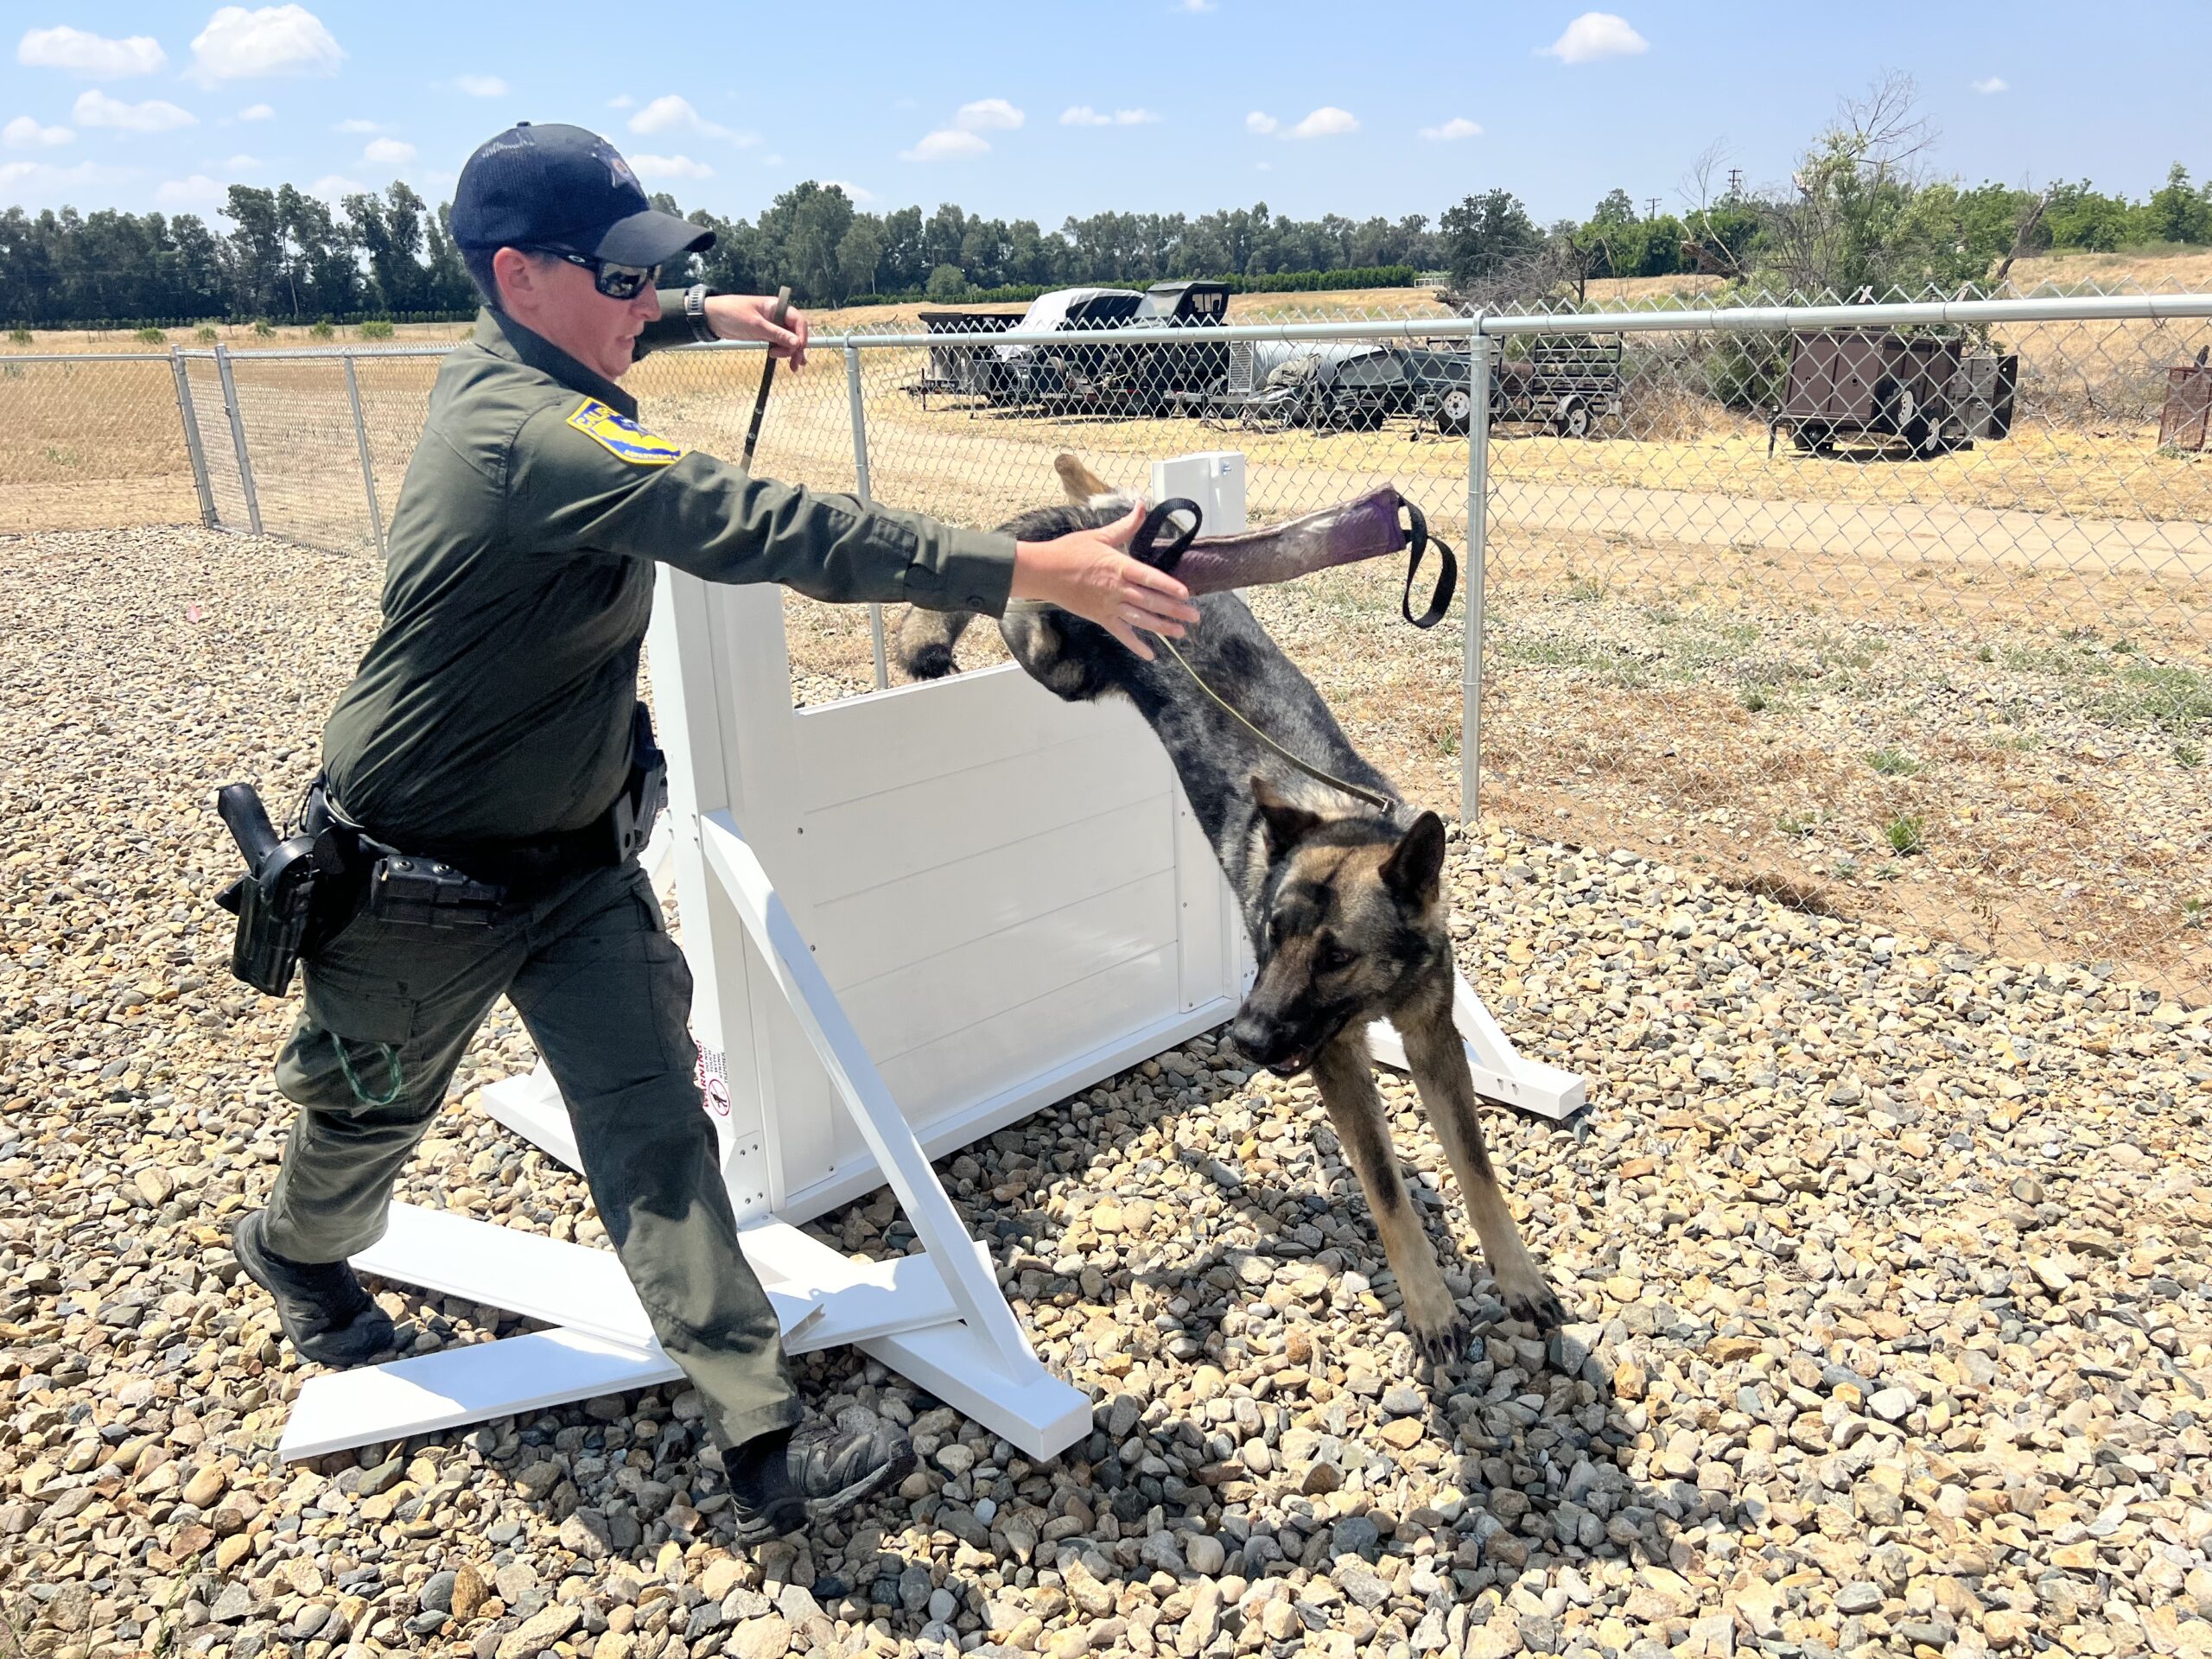 Overcoming Obstacles….In the K9 way